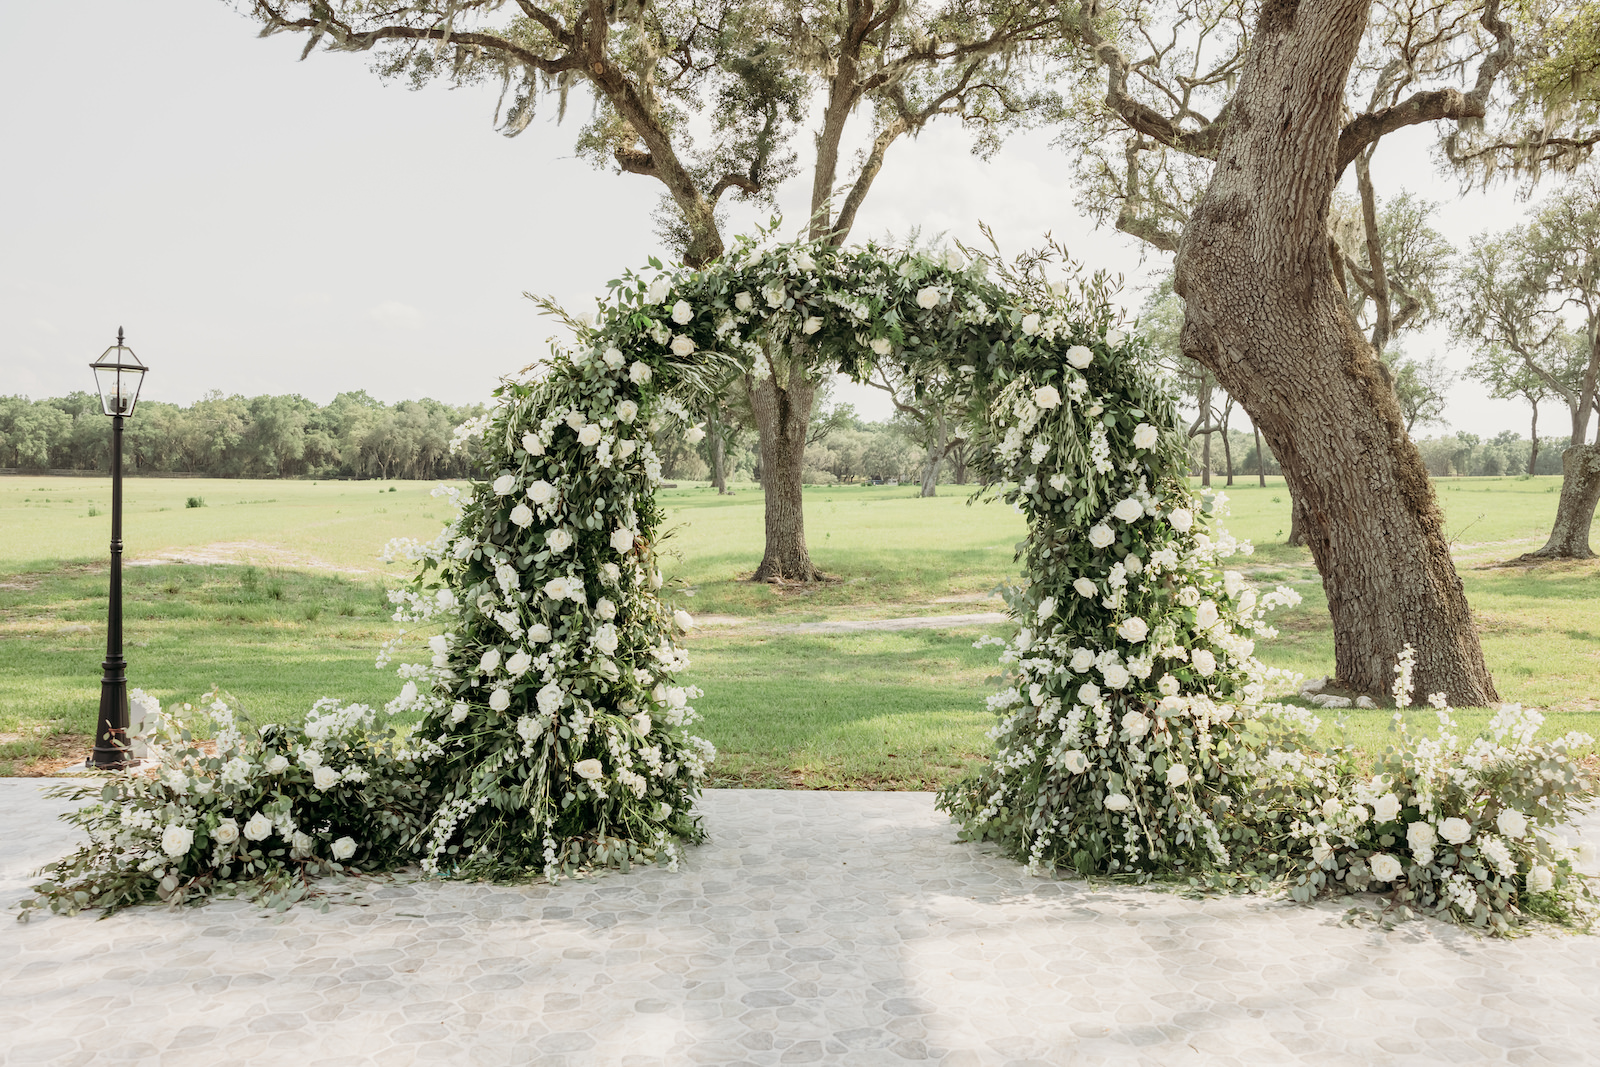 Classic Tampa Wedding Ceremony Decor, Lush Greenery and White Roses Floral Arch